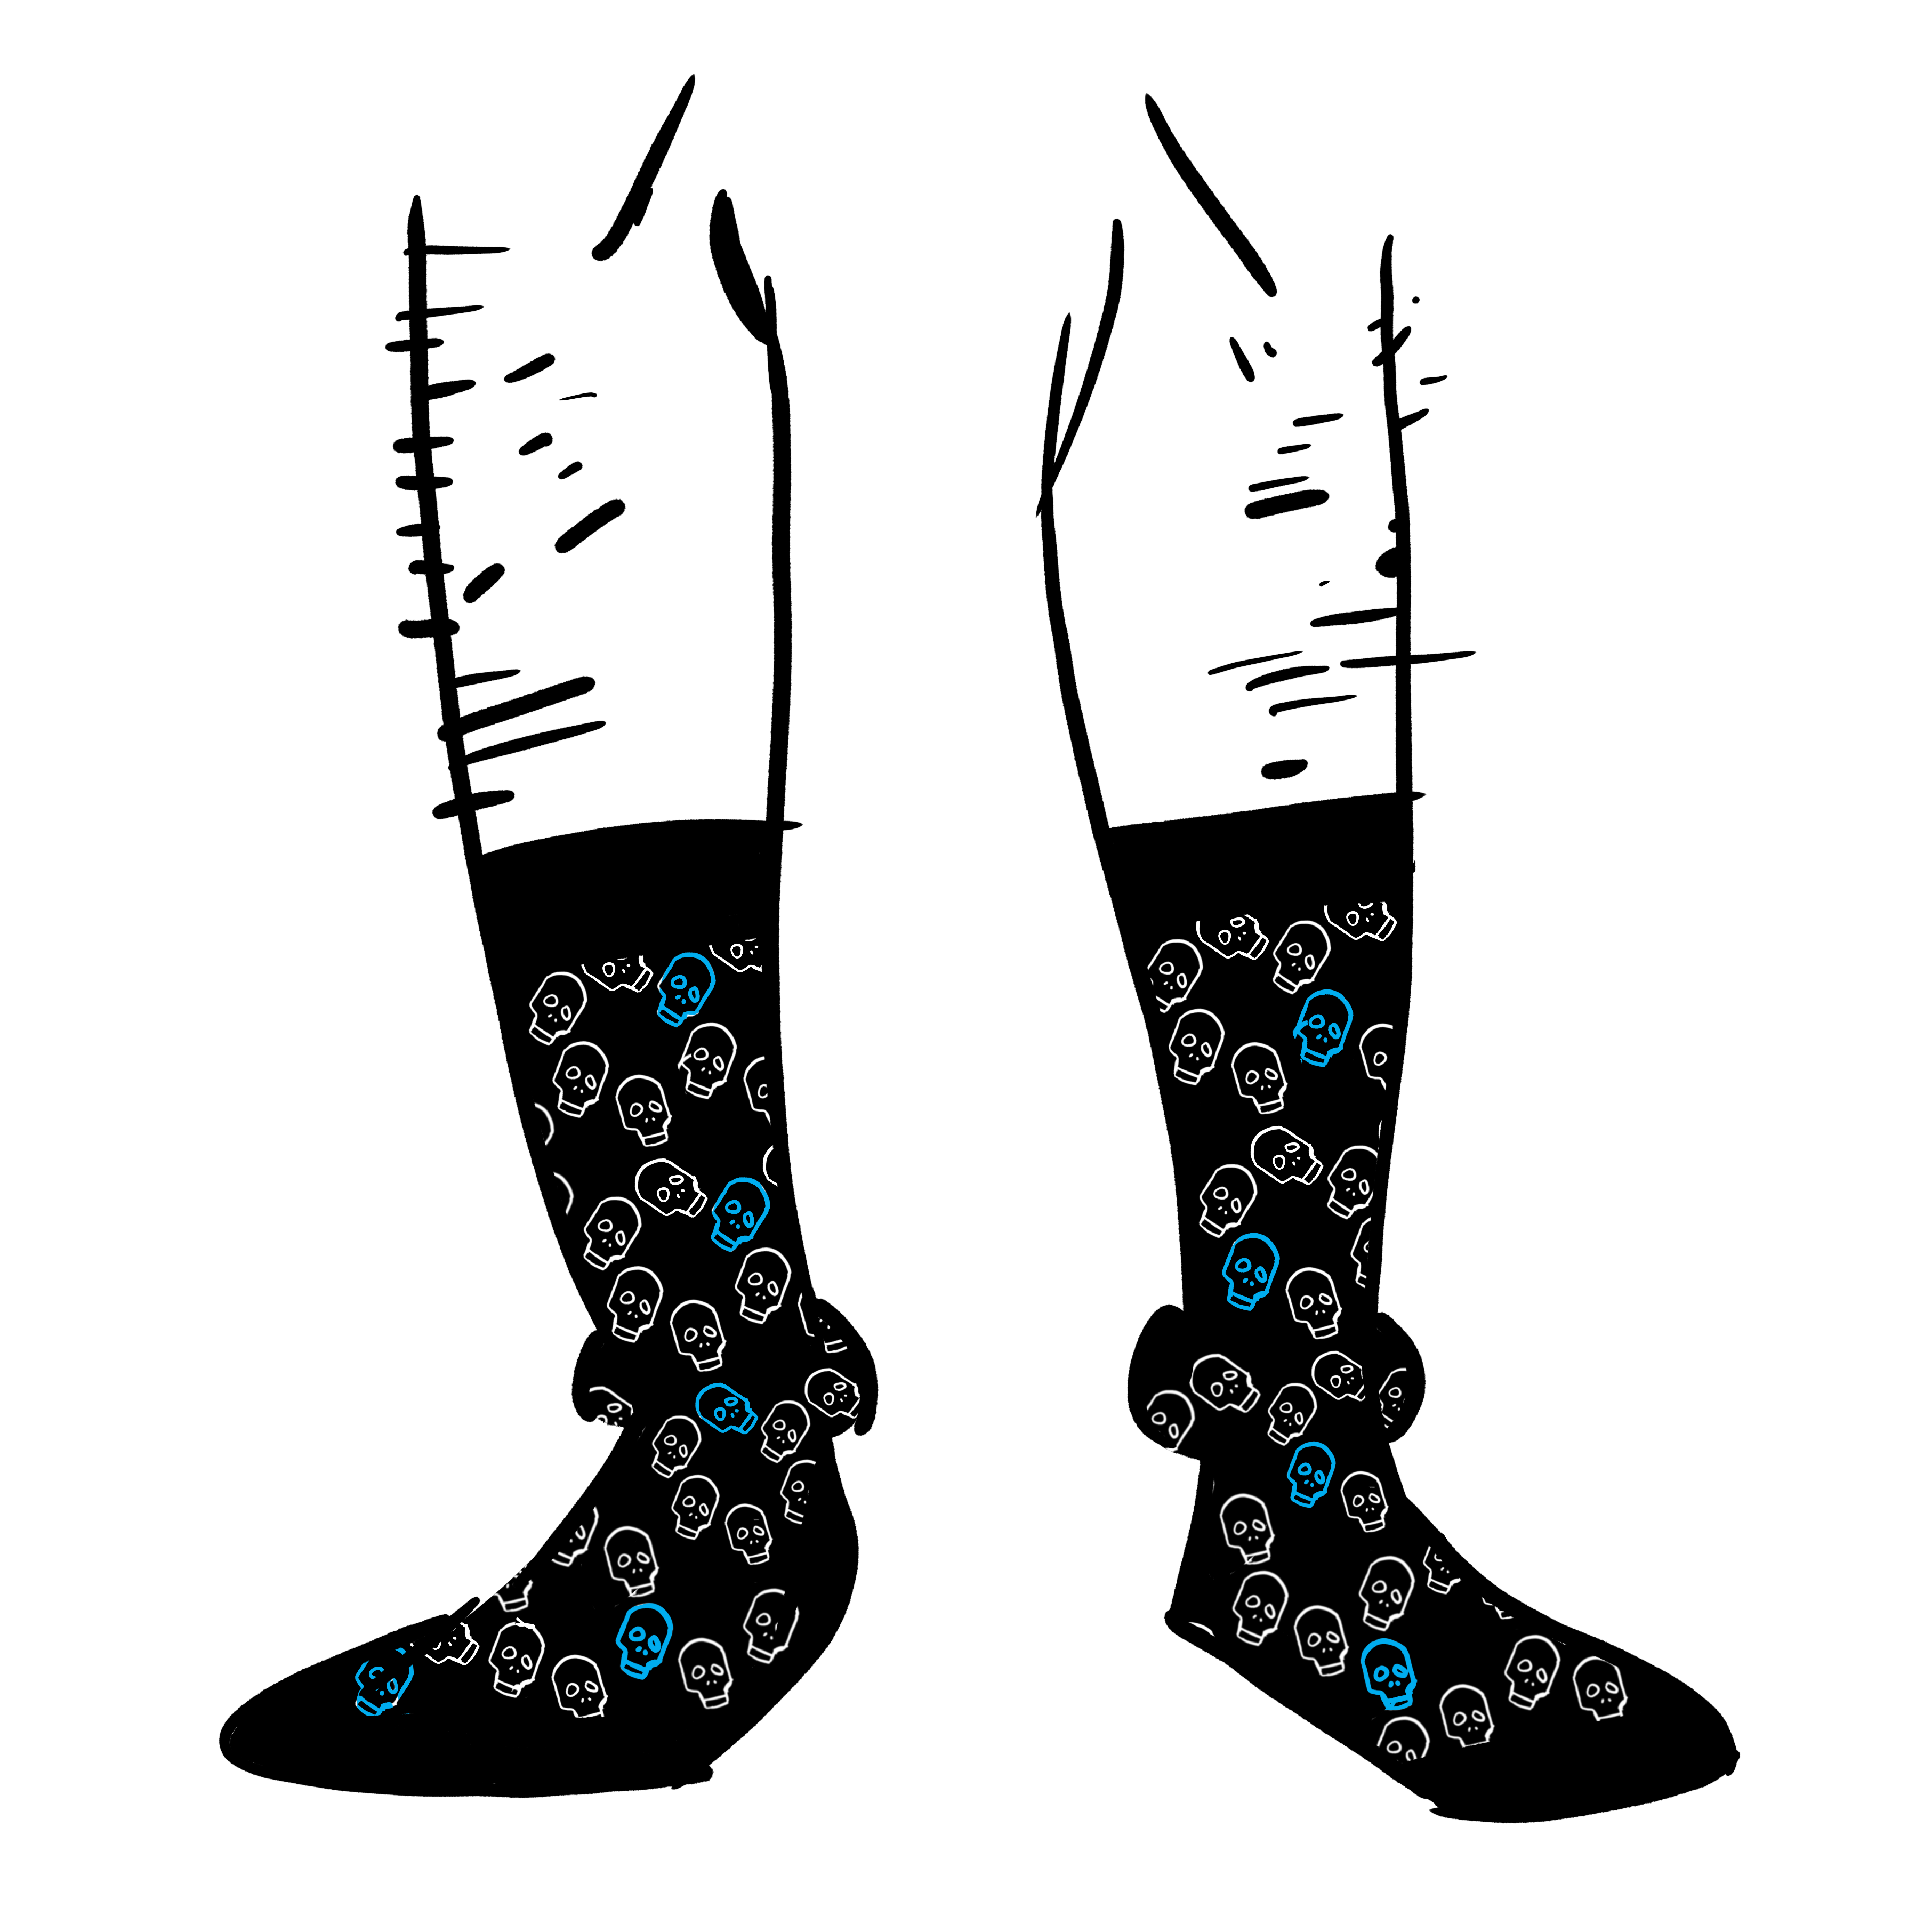 Black socks with a pattern of skulls. The skulls are white outlines in a repeating circle. Occasionally there is a blue skull.